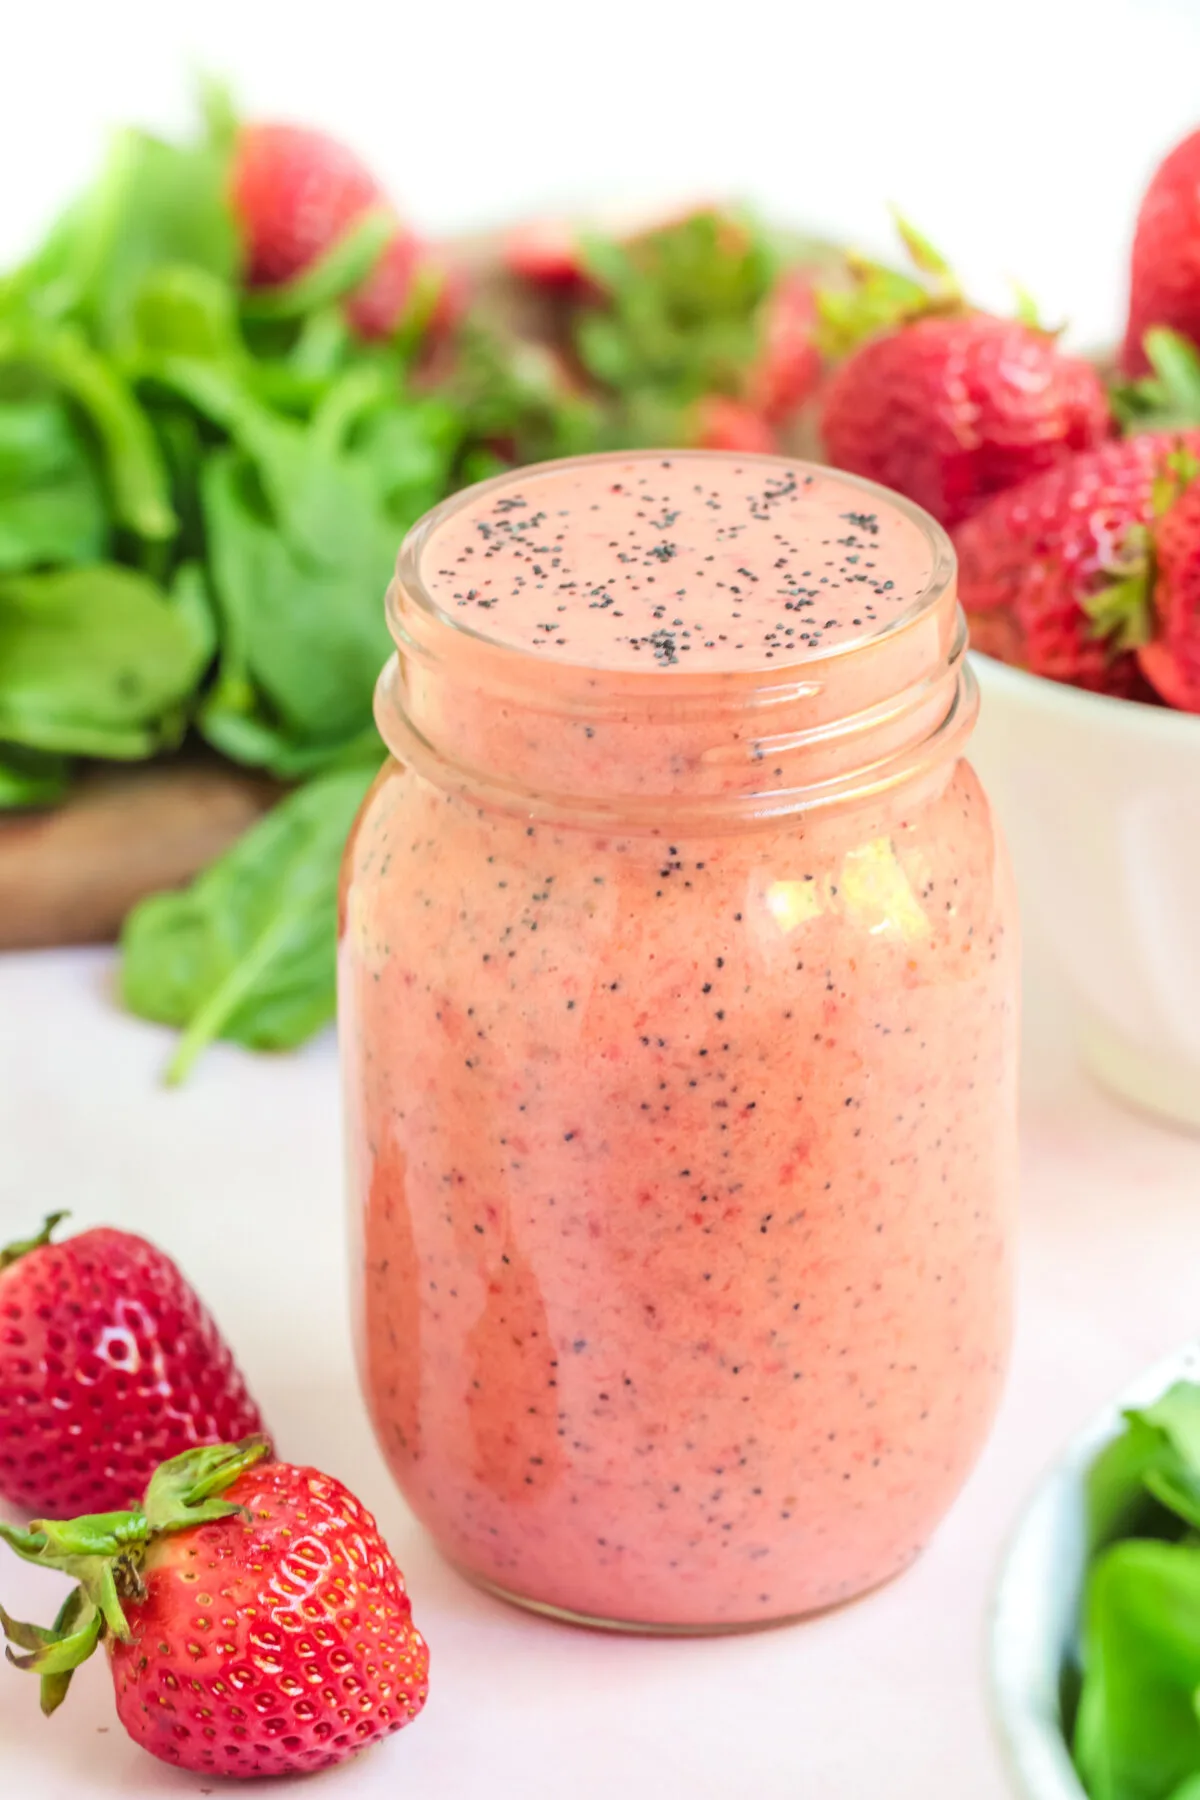 A quick, easy and tasty recipe for strawberry poppy seed salad dressing! Great full-bodied flavours that mix well with your favourite greens.